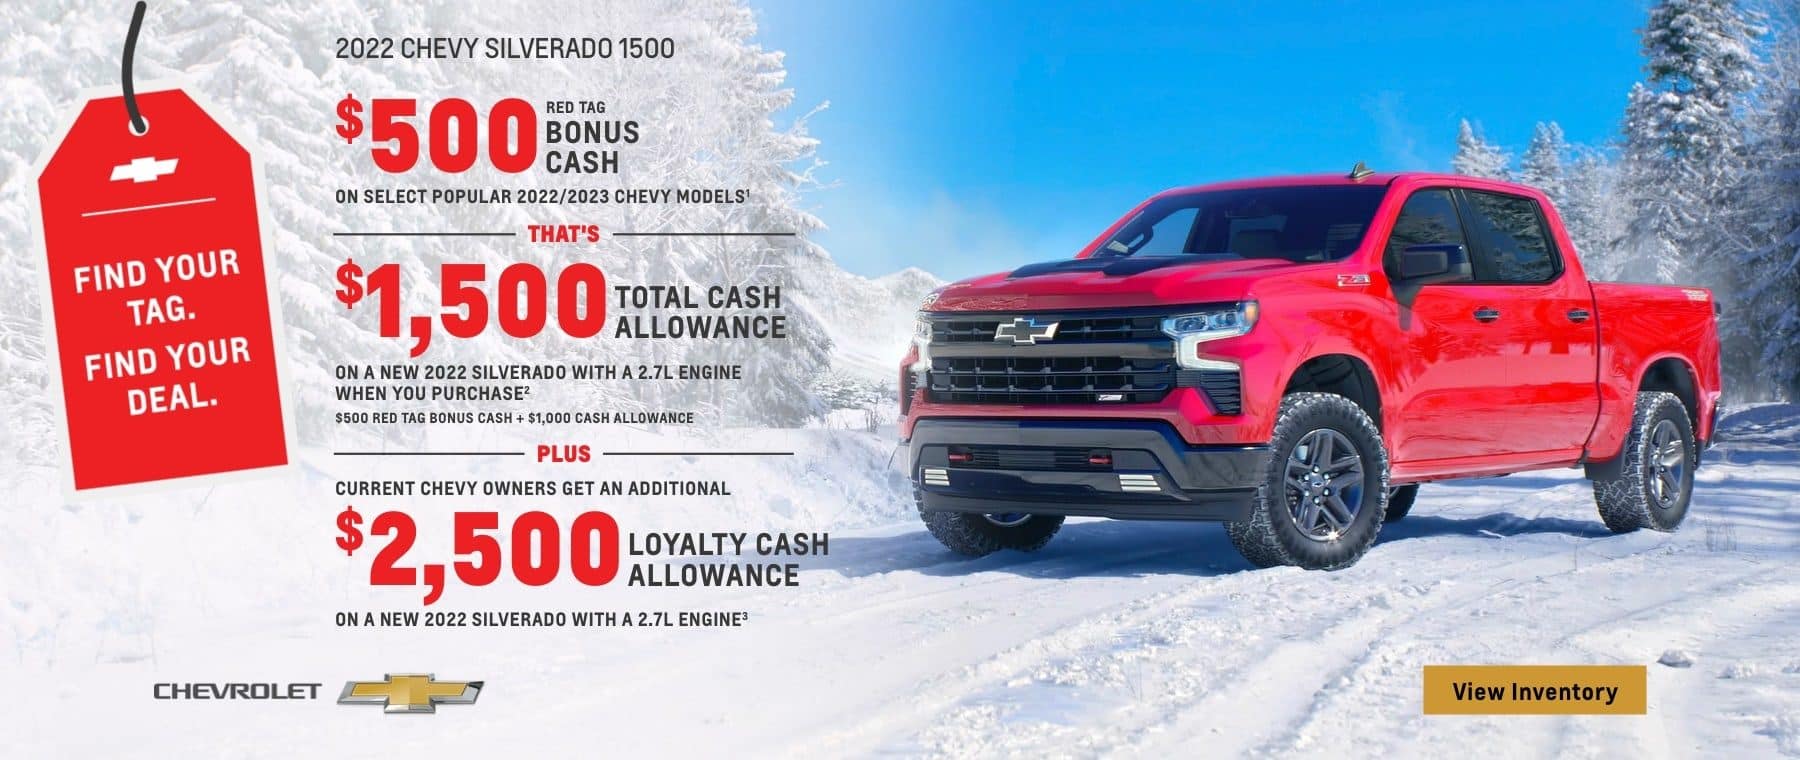 2022 Chevy Silverado 1500. $500 Red Tag Bonus Cash on select popular 2022/2023 Chevy models. That's $1,500 total cash allowance on a new 2022 Silverado with a 2.7L engine when you purchase. $500 Red Tag Bonus Cash plus $1,000 cash allowance. Plus, current Chevy owners get an additional $2,500 loyalty cash allowance on a new Silverado with 2.7L engine.